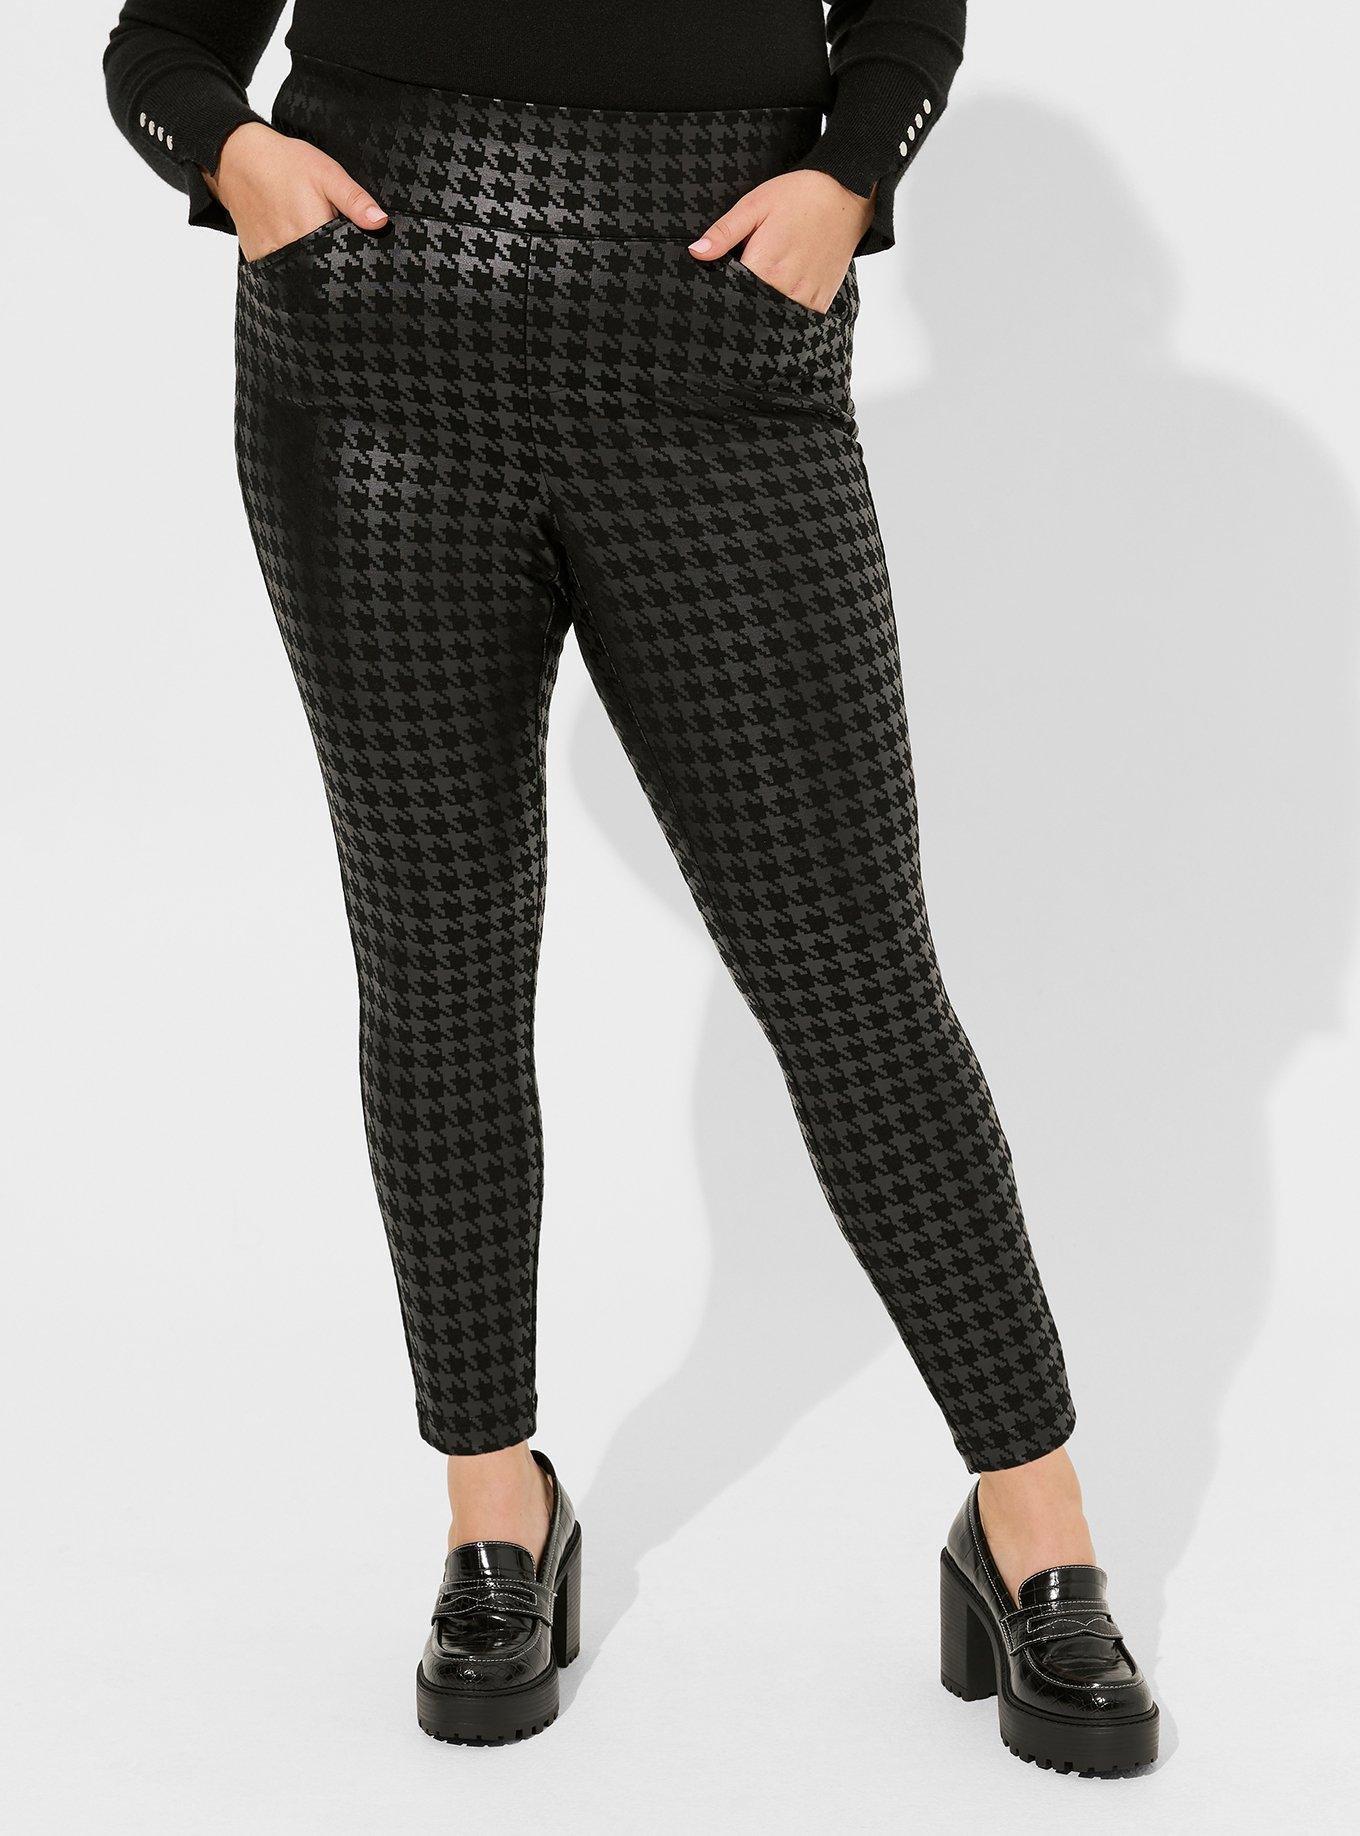 Fashion Houndstooth Black Stockings Women New Tight High Thin